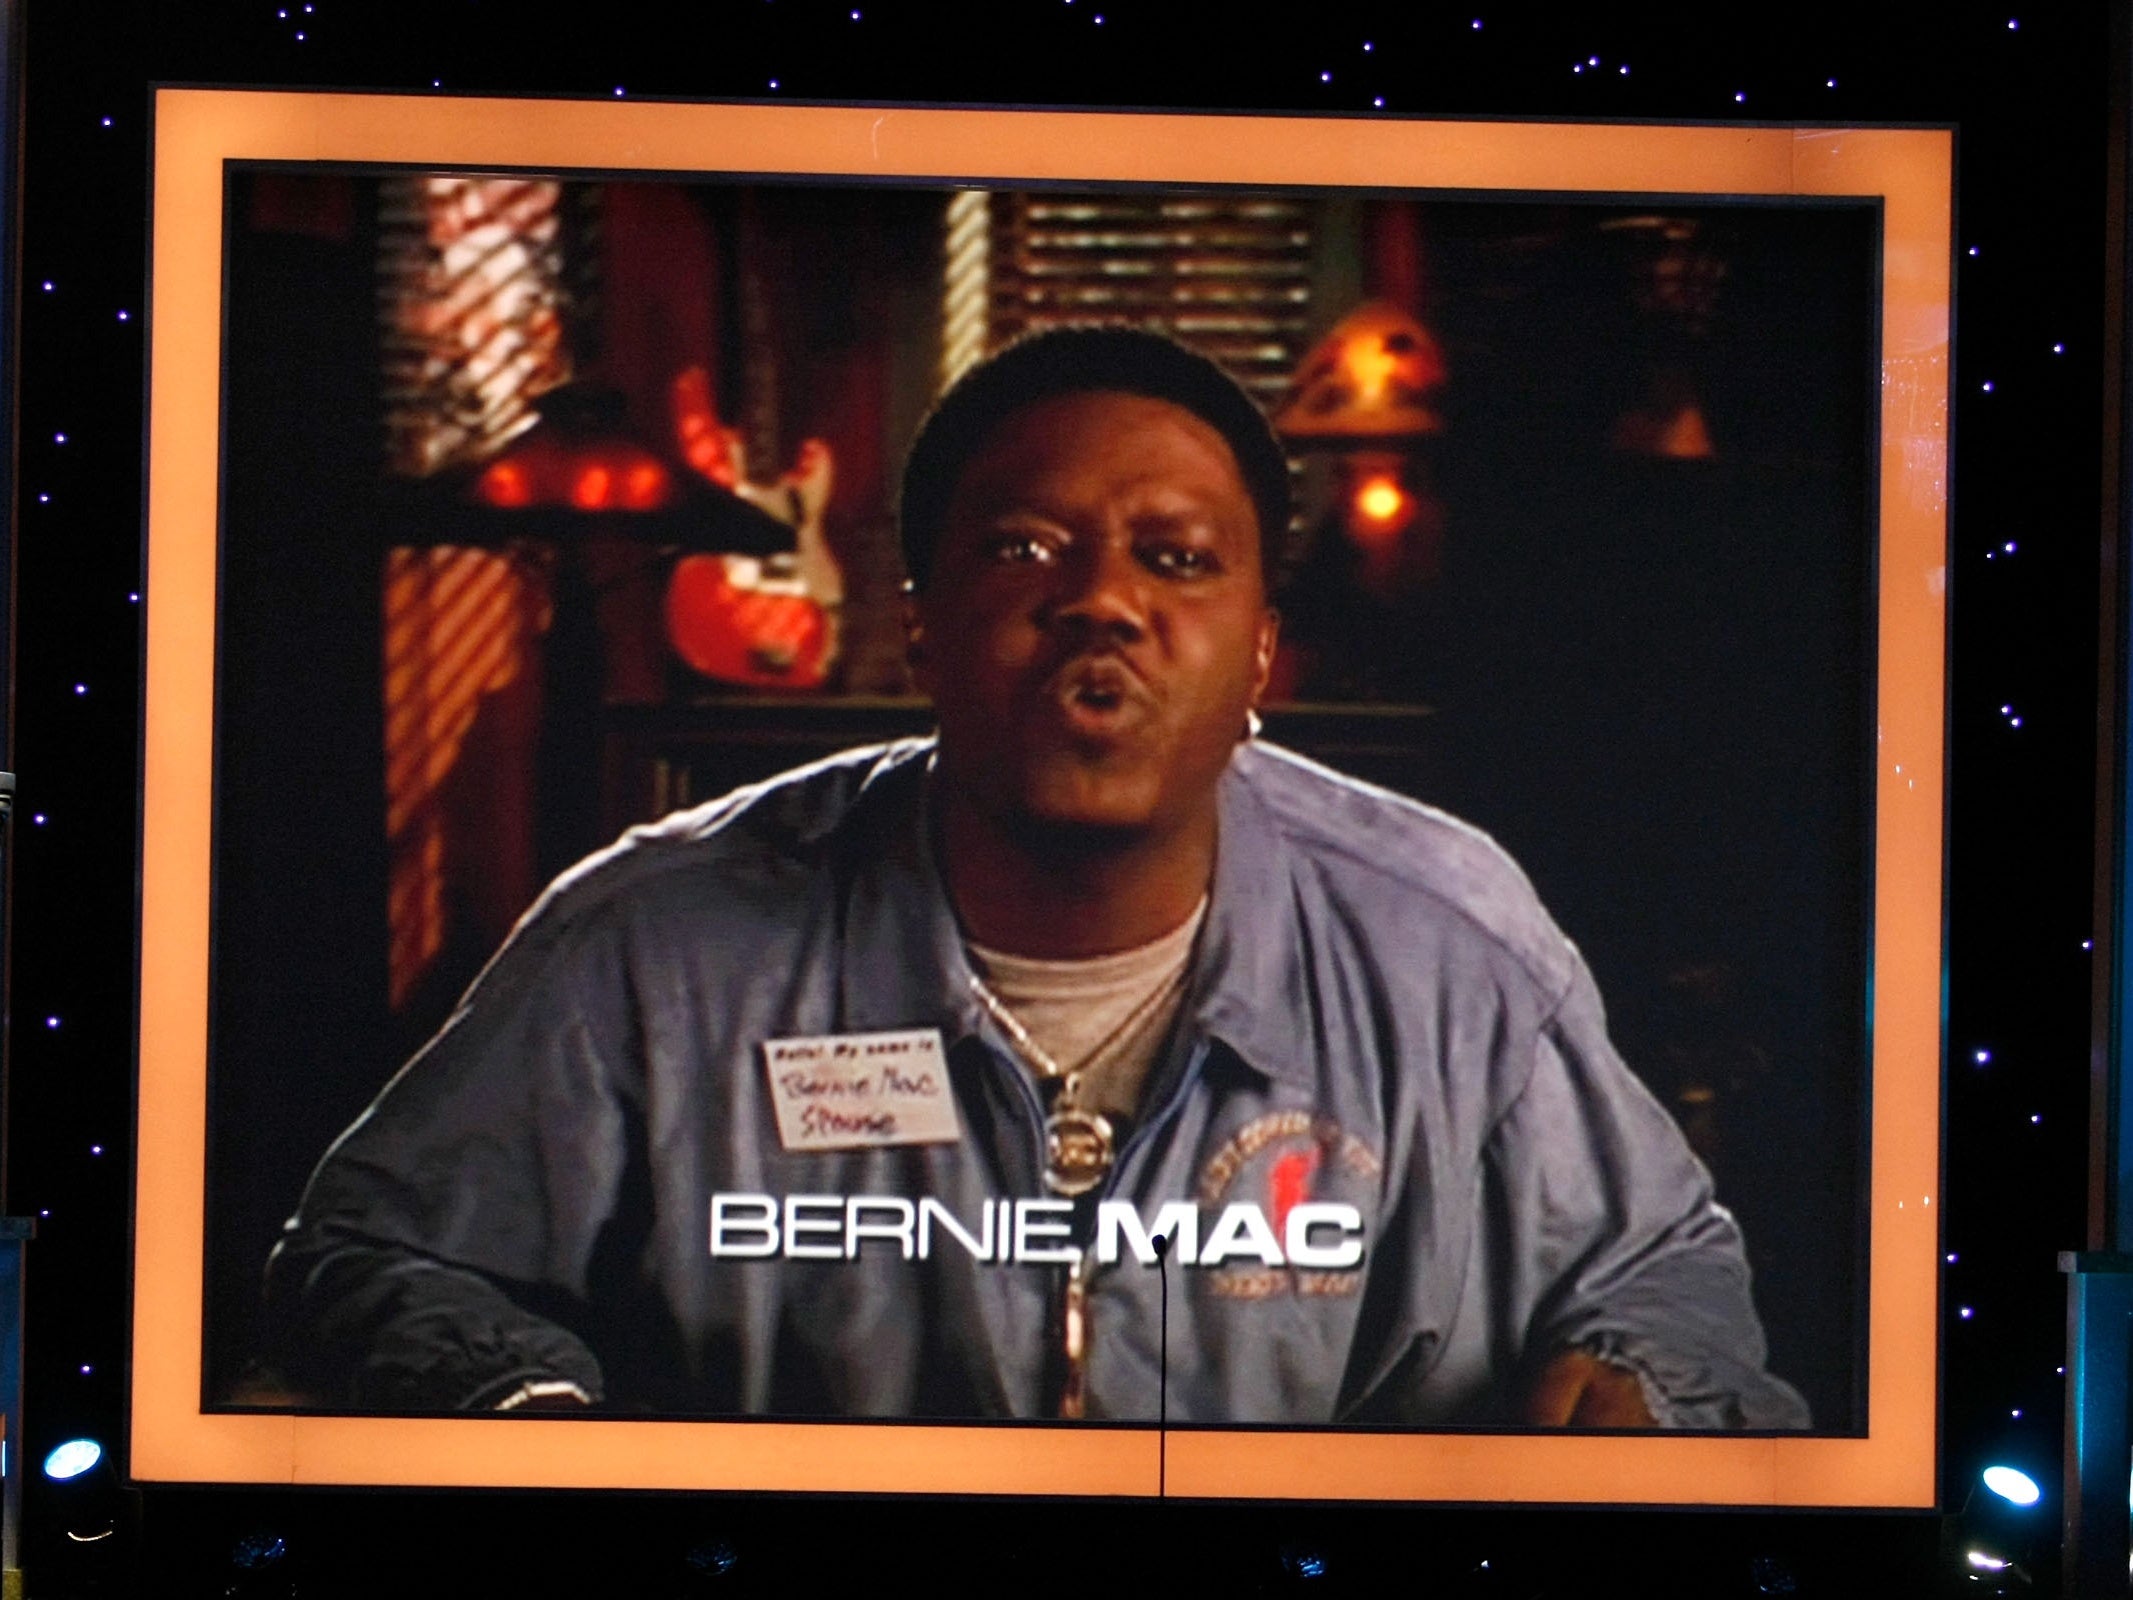 Today In 2001, ‘The Bernie Mac Show’ Makes Its Debut